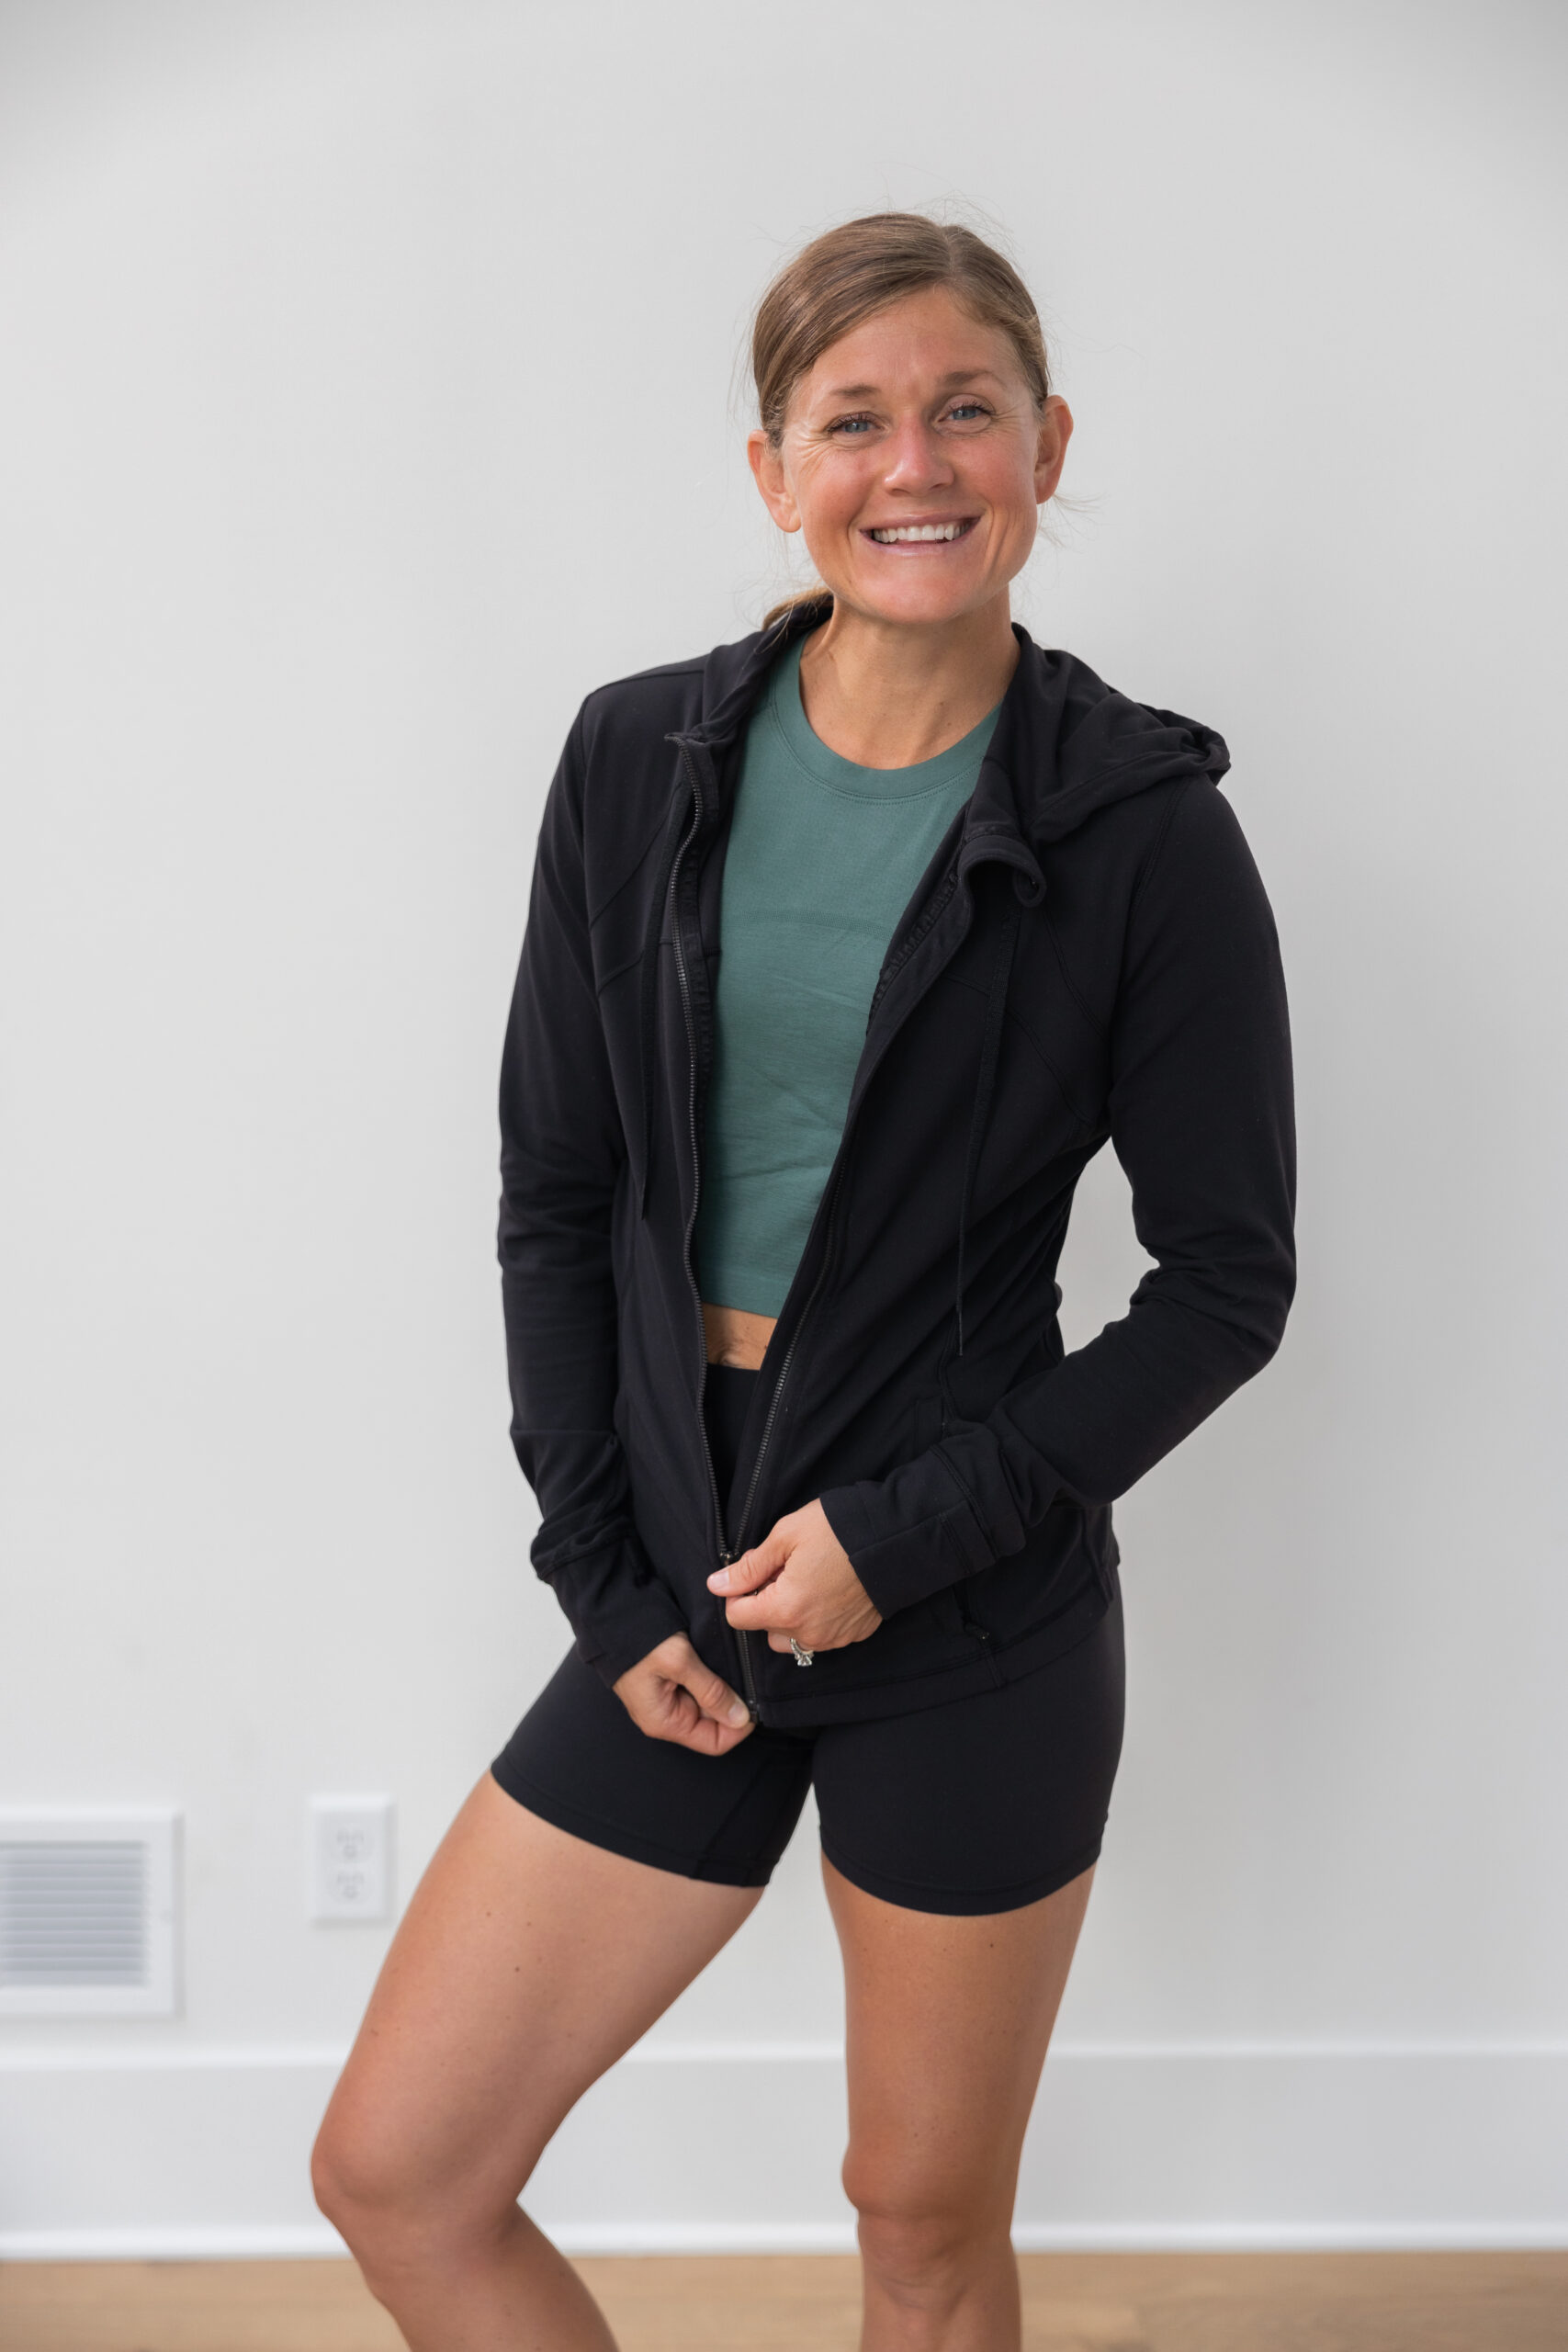 Best lululemon Jackets for Everyday Wear (Size and Fit Guide